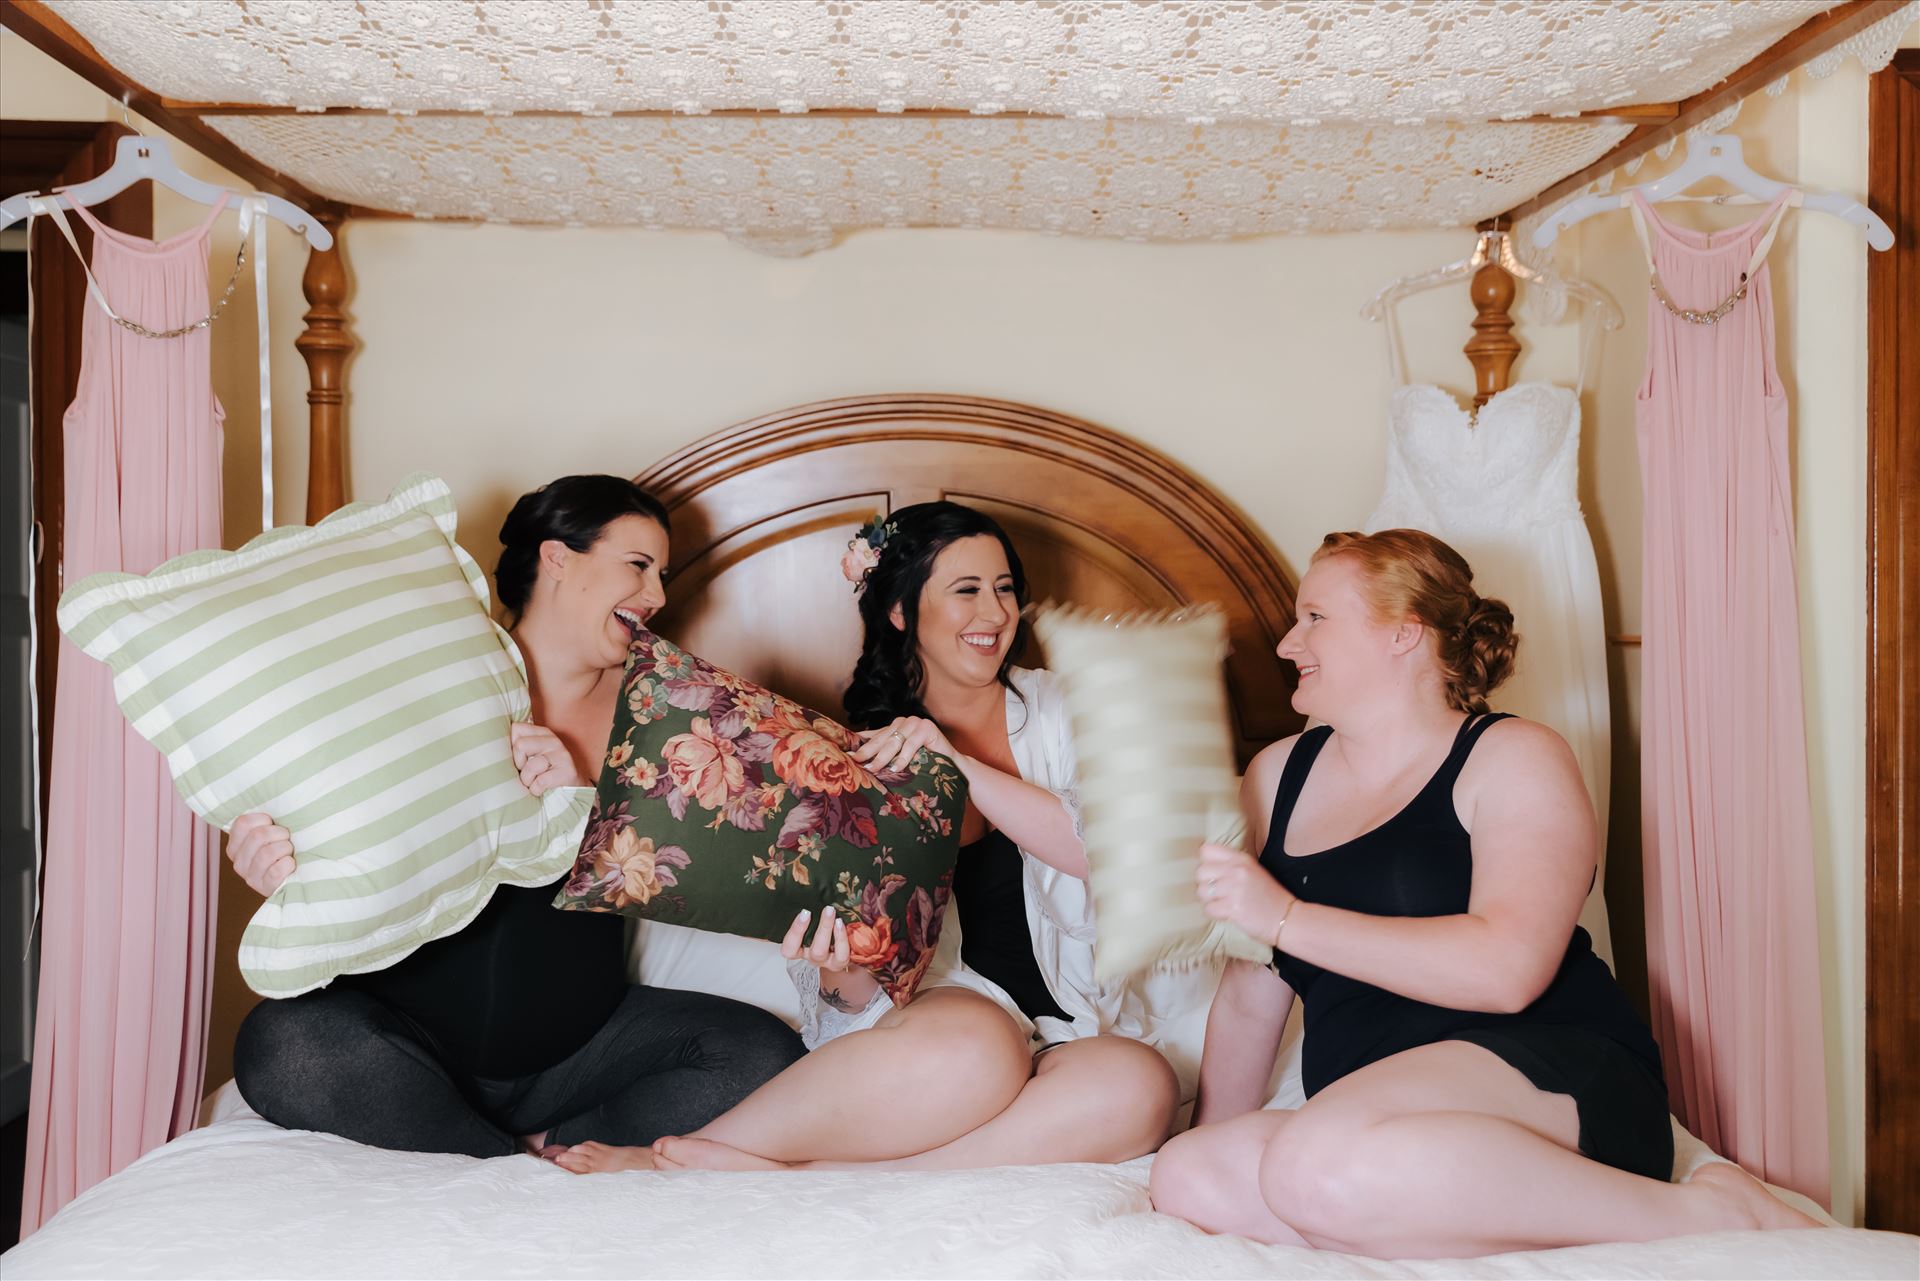 Kendra and Mitchell 013 Emily House Bed and Breakfast Paso Robles California Wedding Photography by Mirrors Edge Photography.  The girls having fun by Sarah Williams